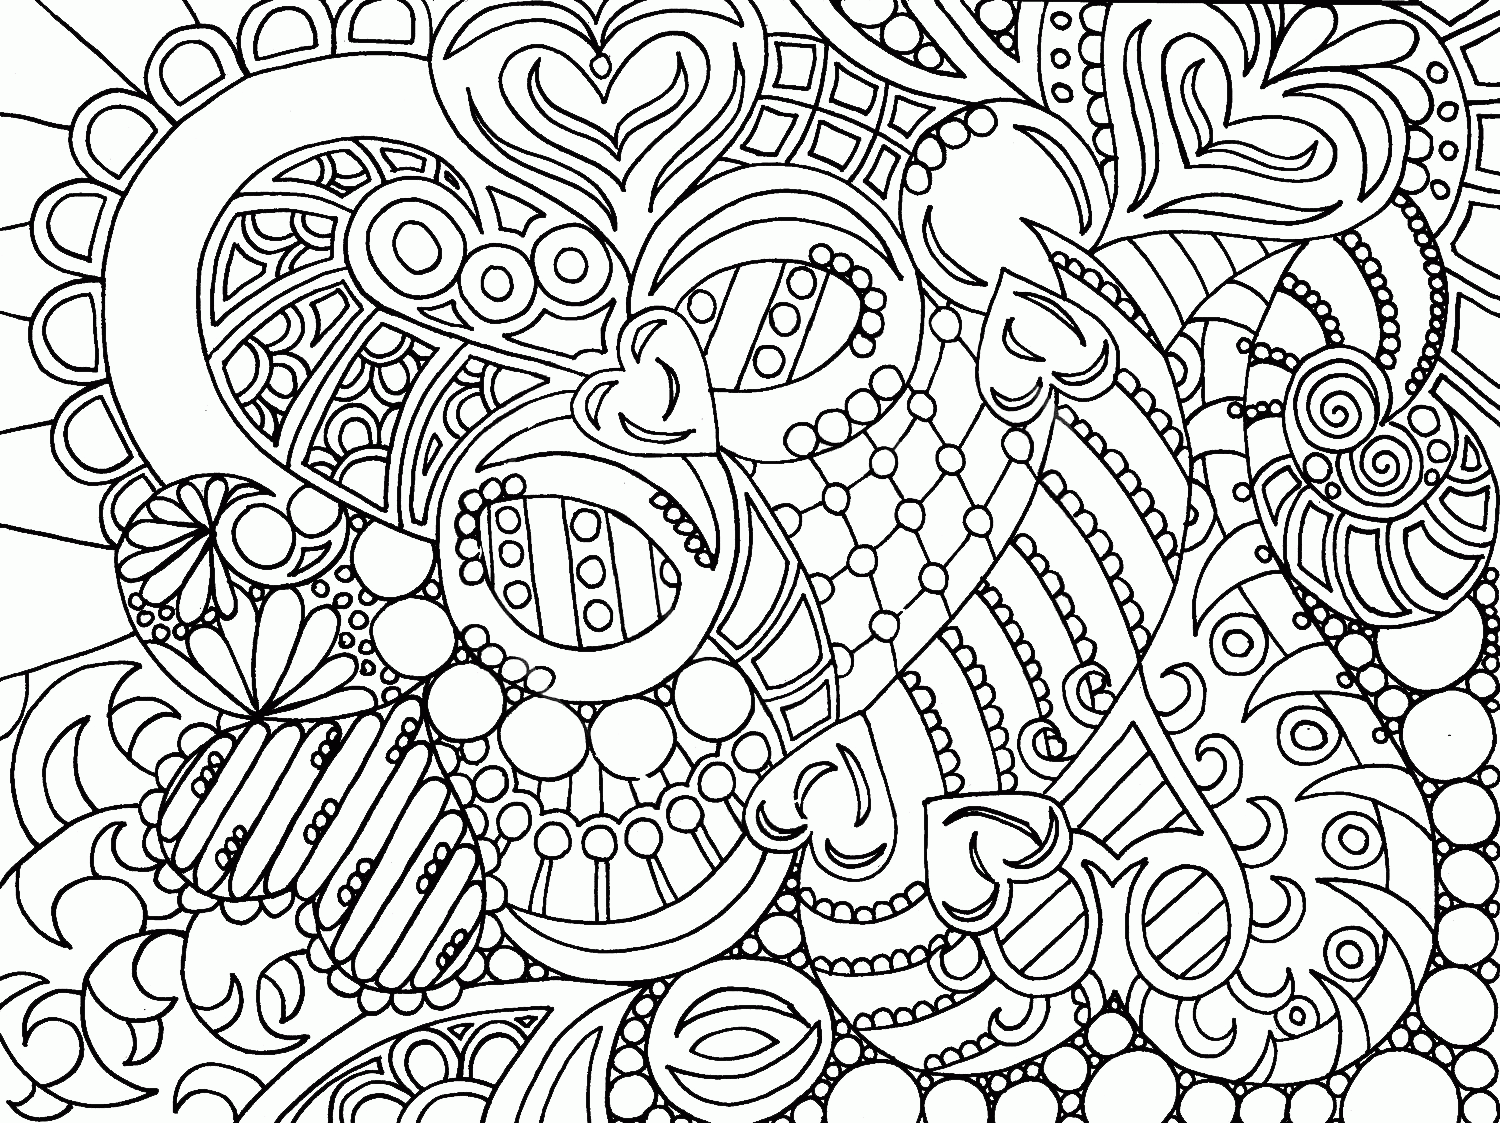 Advanced Coloring Pictures - Coloring Pages for Kids and for Adults